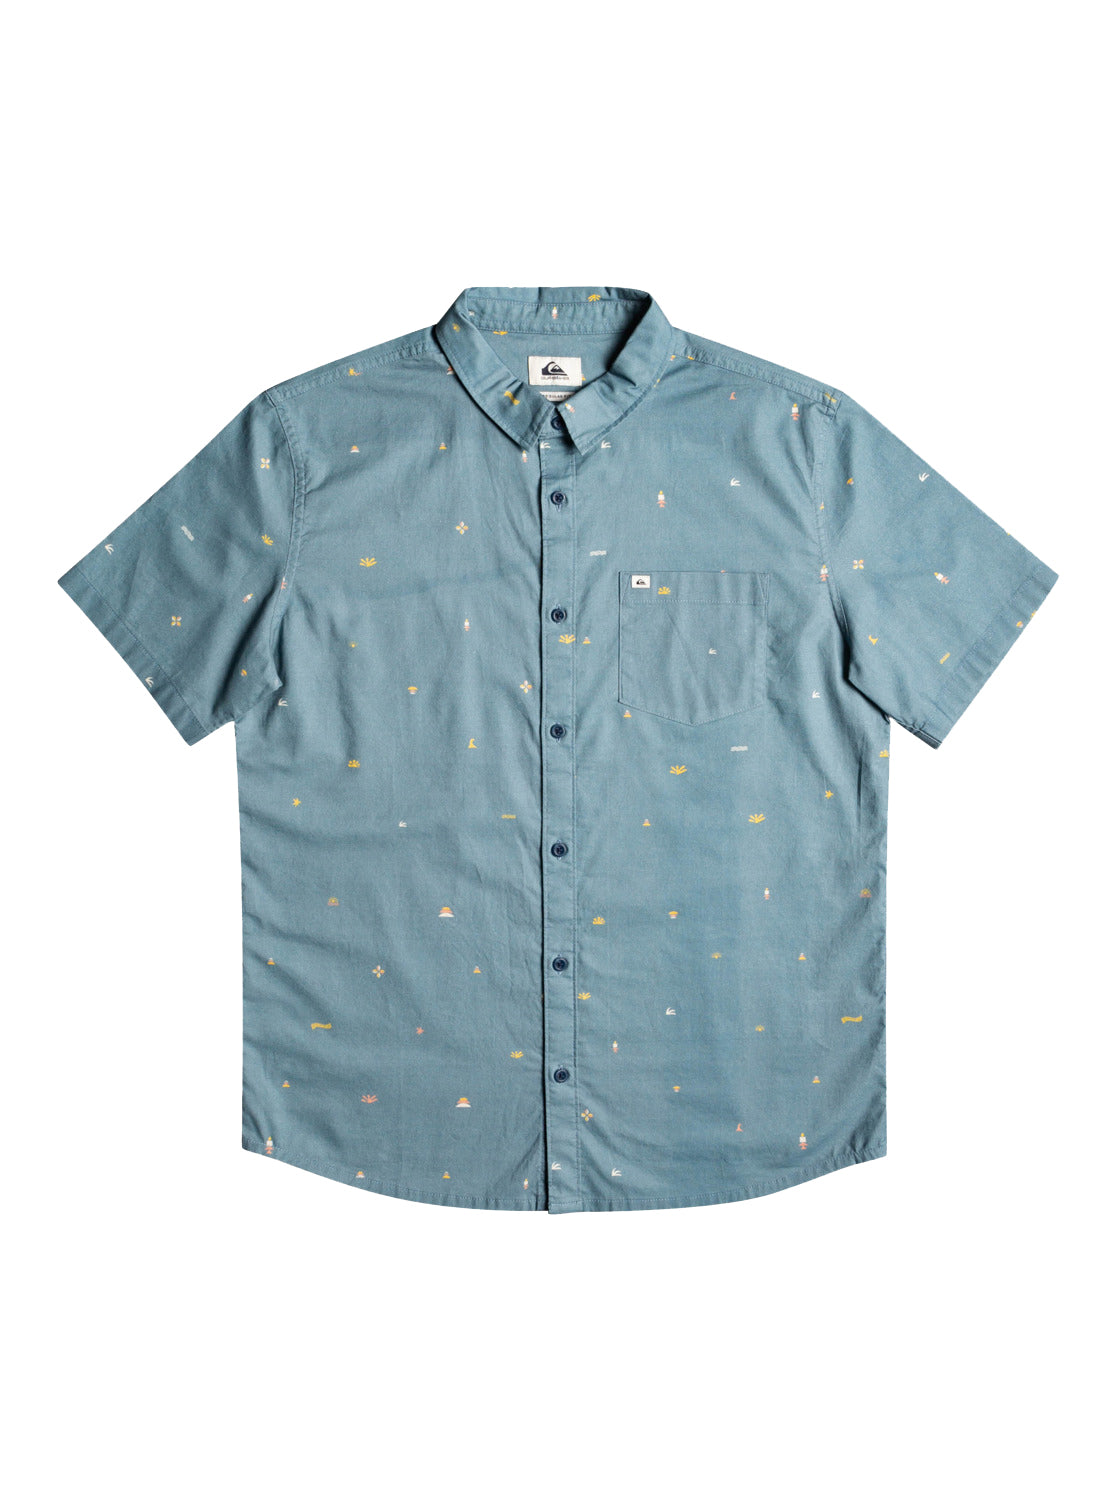 Quiksilver Spaced Out SS Woven  BLM6 M